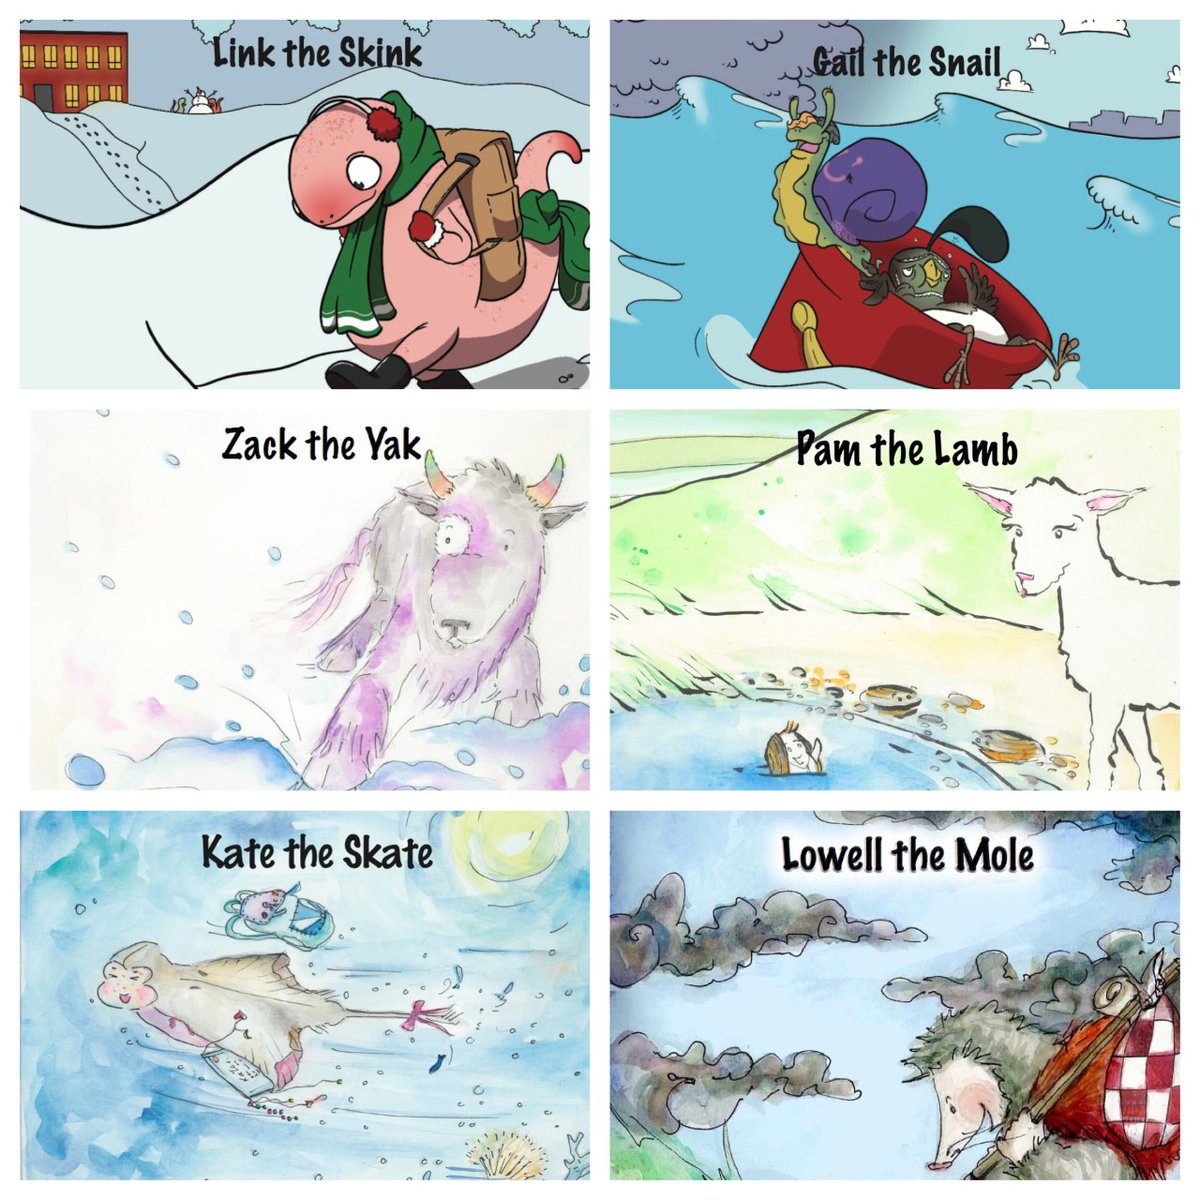 My #rhyming, #readaloud, picture #books are available at @LibrairieClio @chapterspointec @IndigoLaval @ColesAngrignon @SingingPebble and anywhere in Canada through librairieclio.ca. #reading #booksbooksbooks #rhyming #readaloud #newwords #literacy #fun